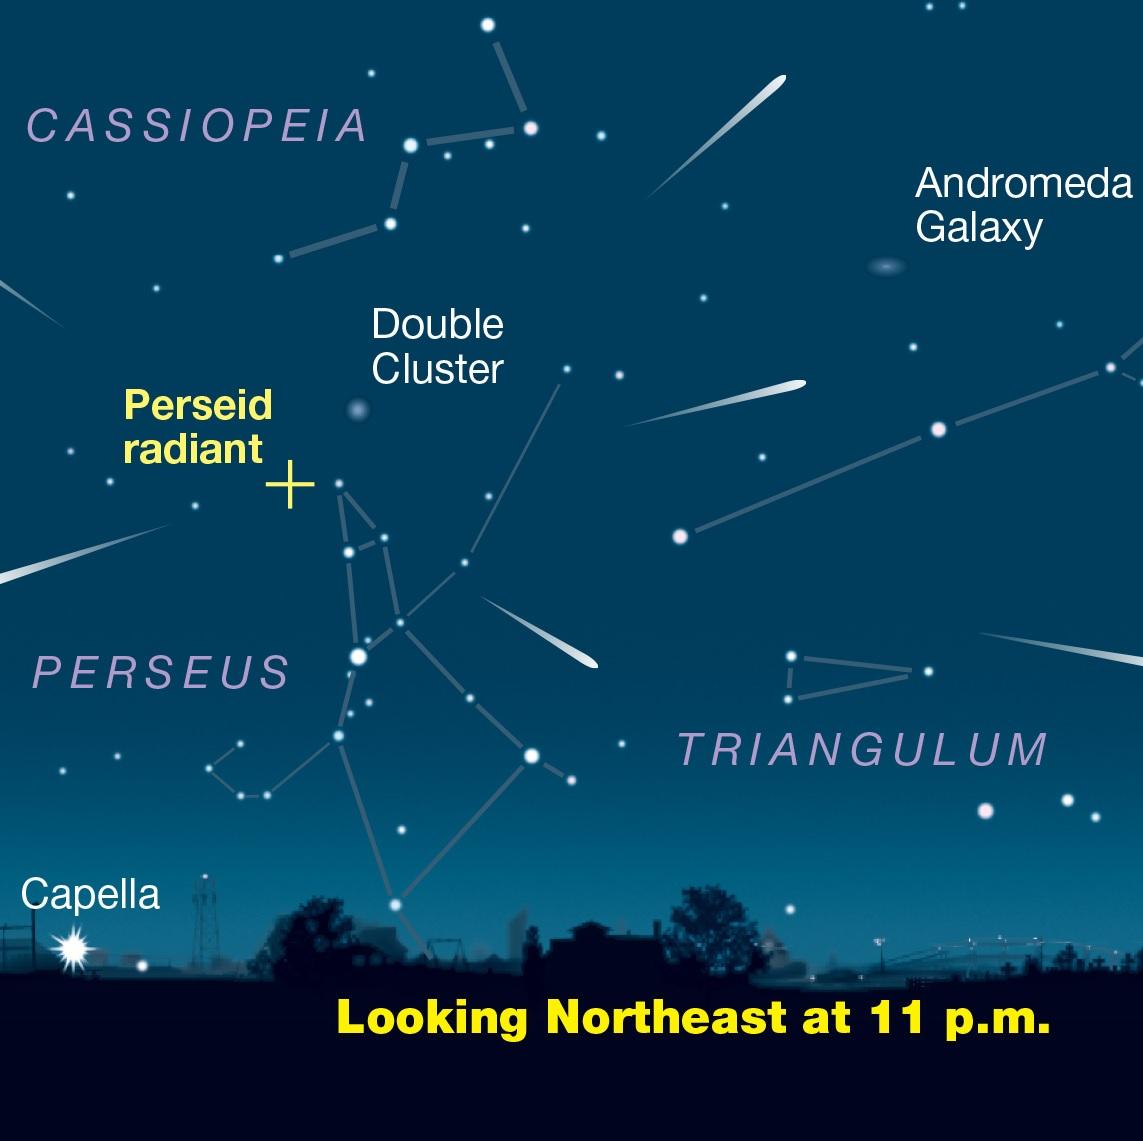 Driftless Stargazing's Heasley explains how to see the Perseids meteor shower